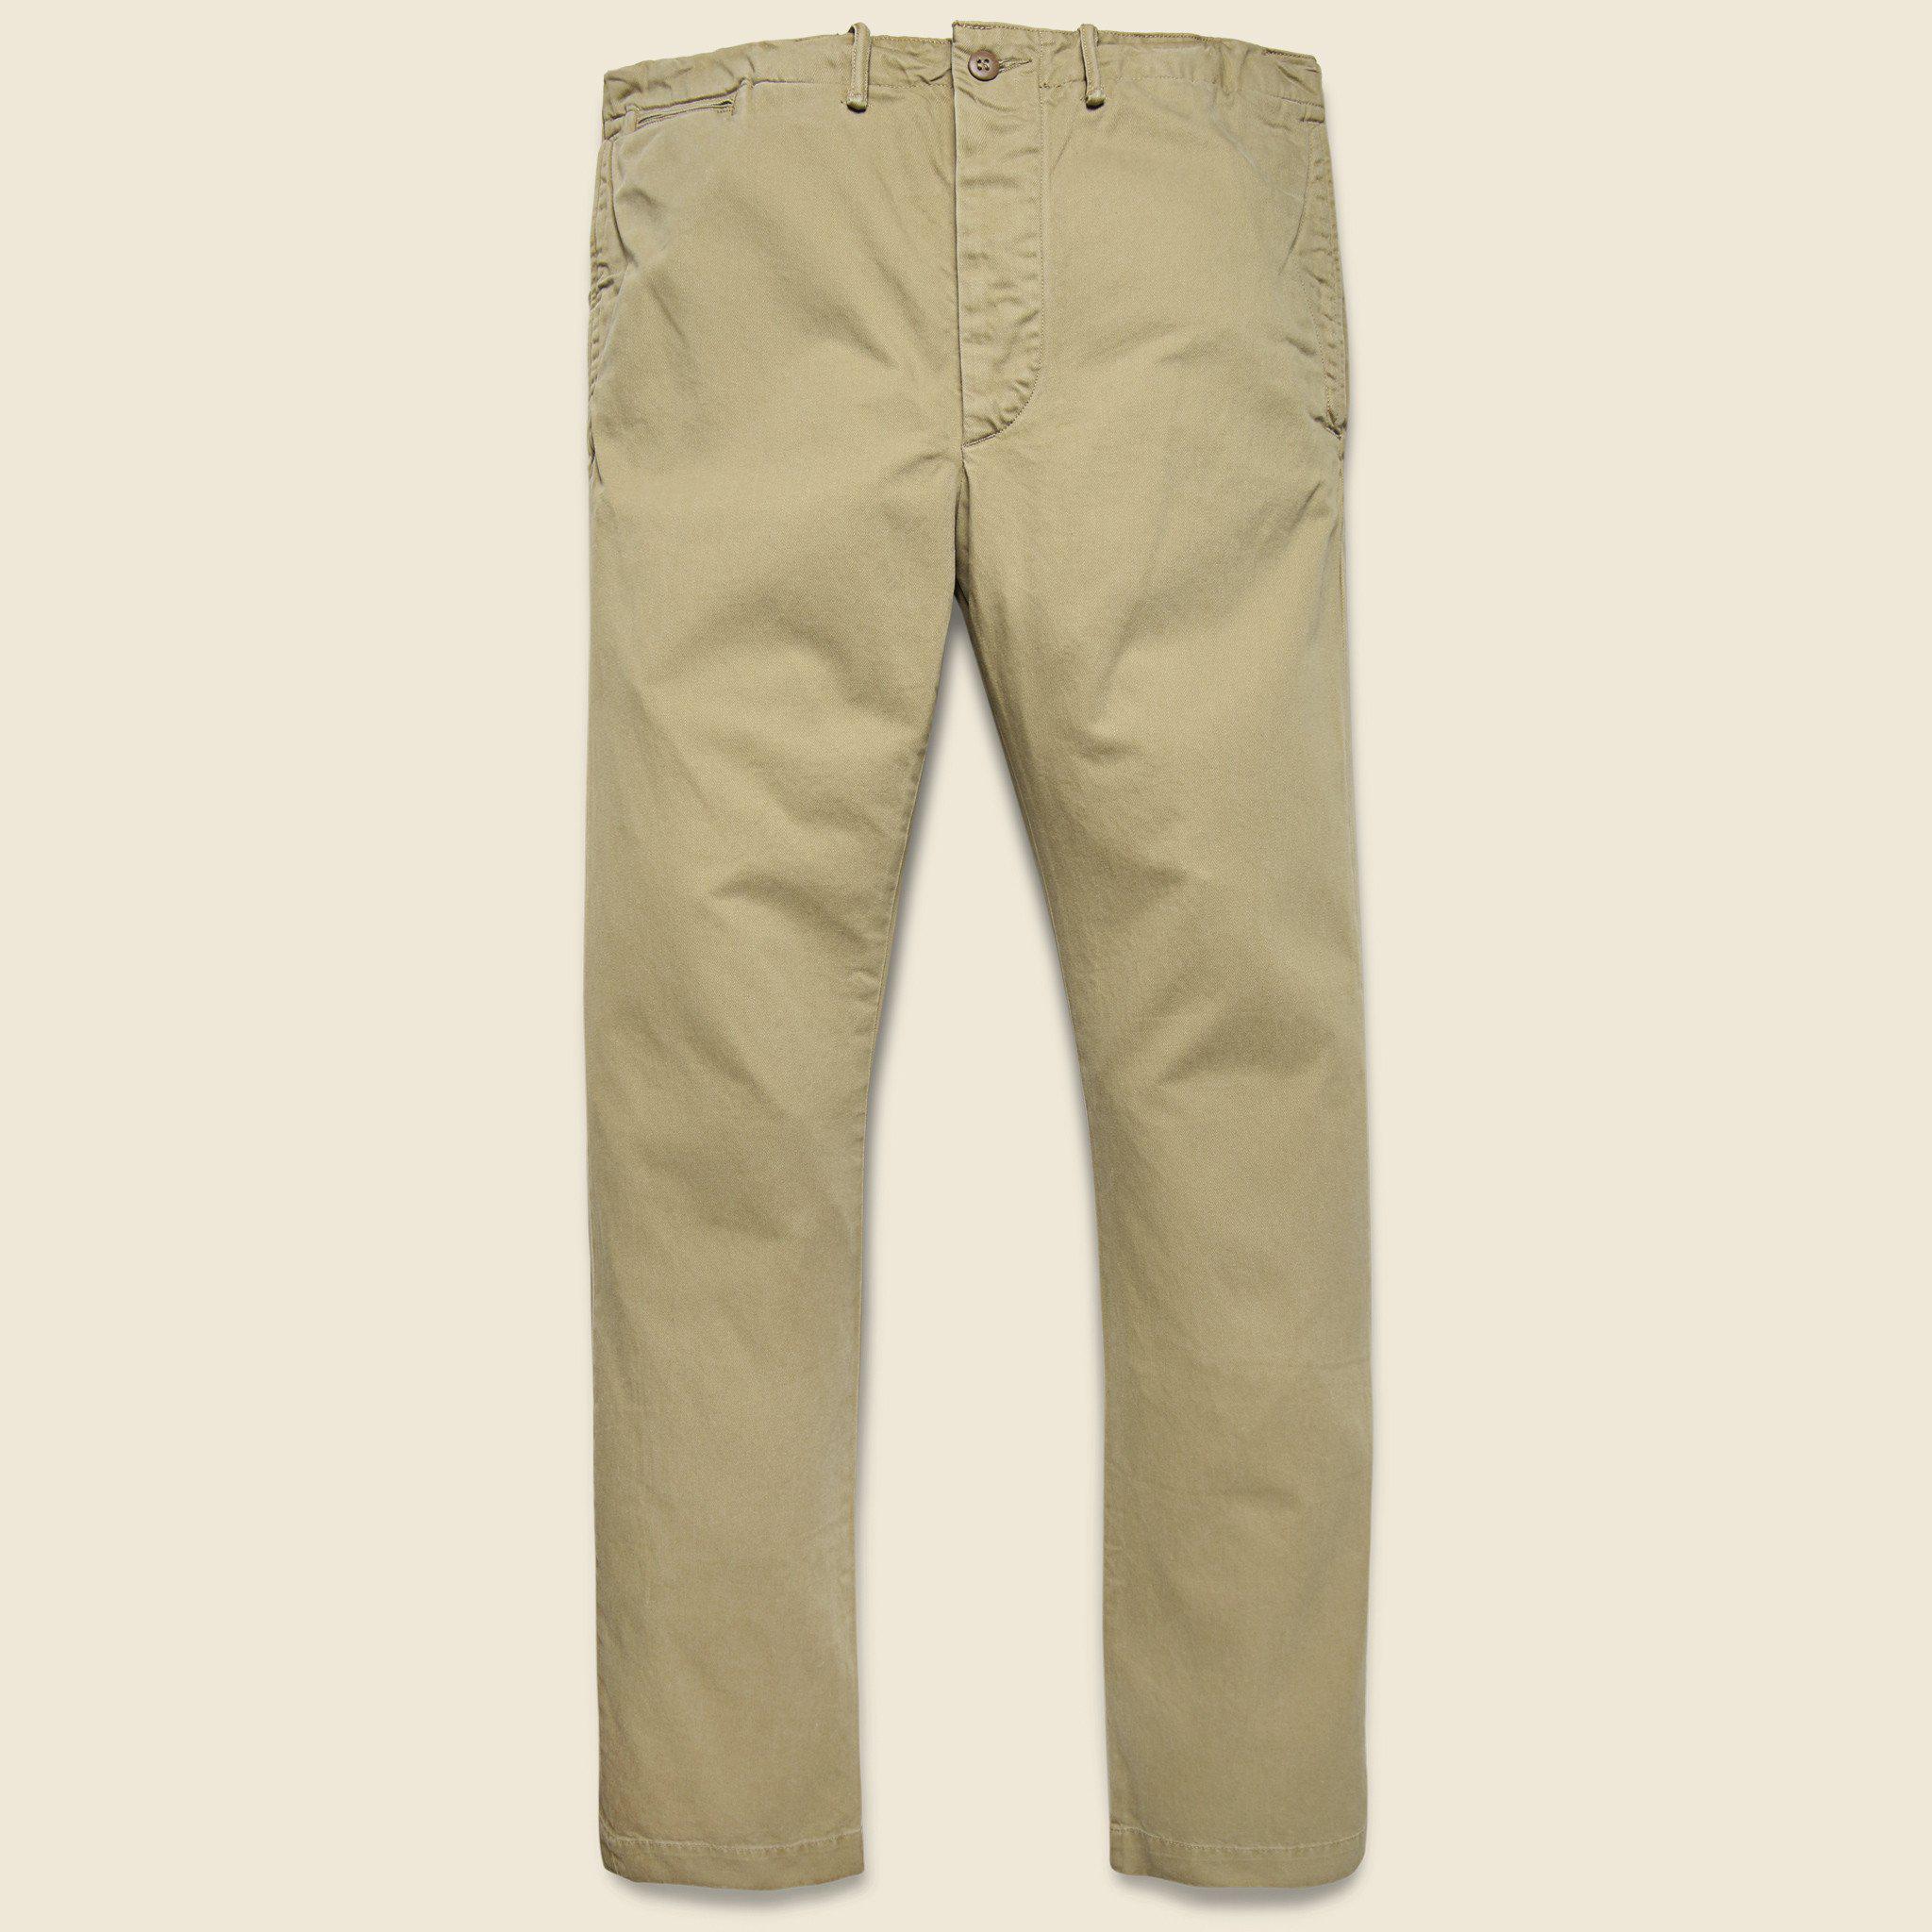 RRL Cotton Officer Chino - Khaki in Natural for Men - Lyst